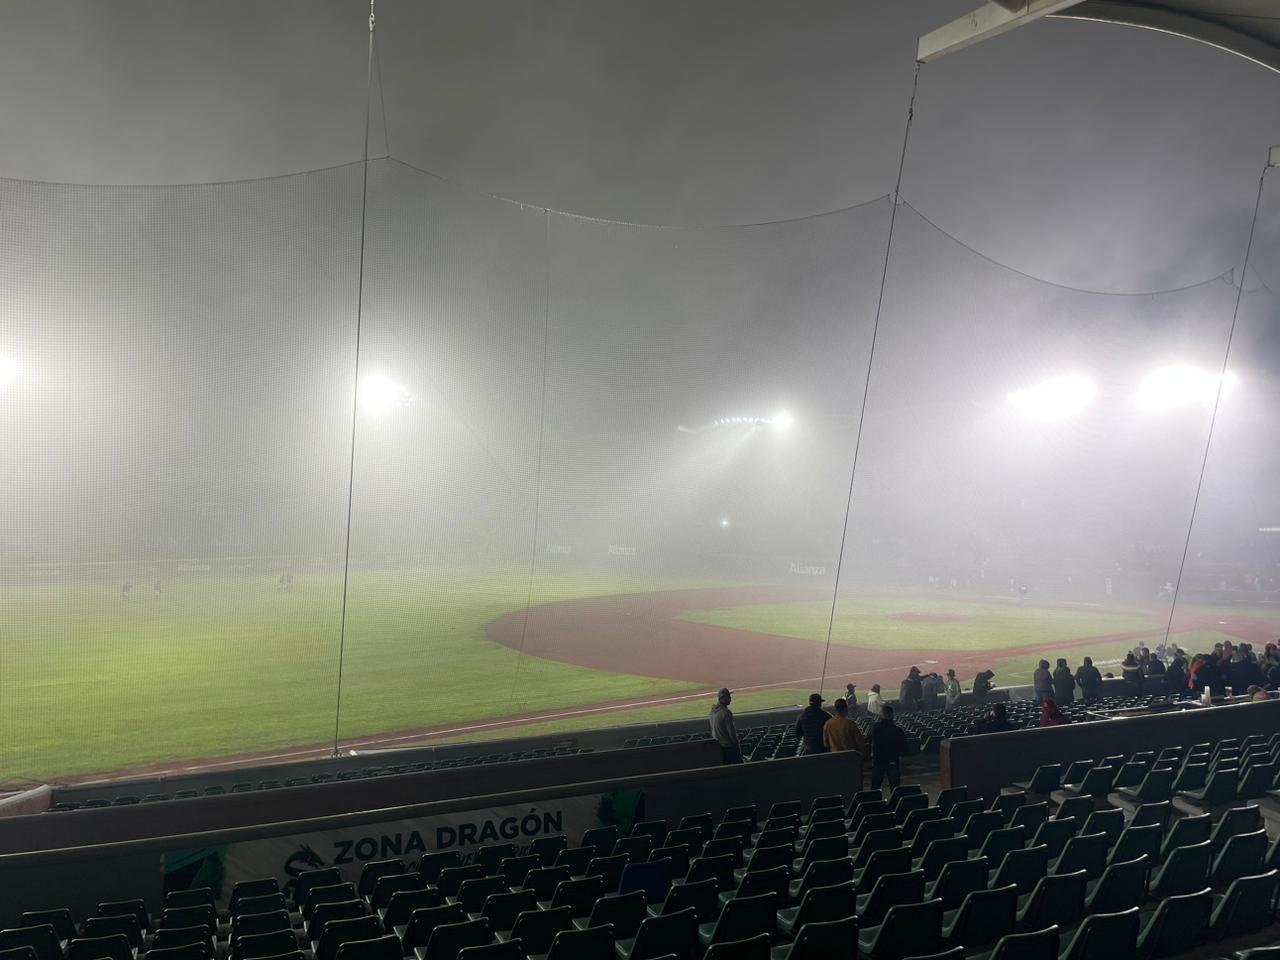 $!The fog did its thing at the Saraperos Stadium.